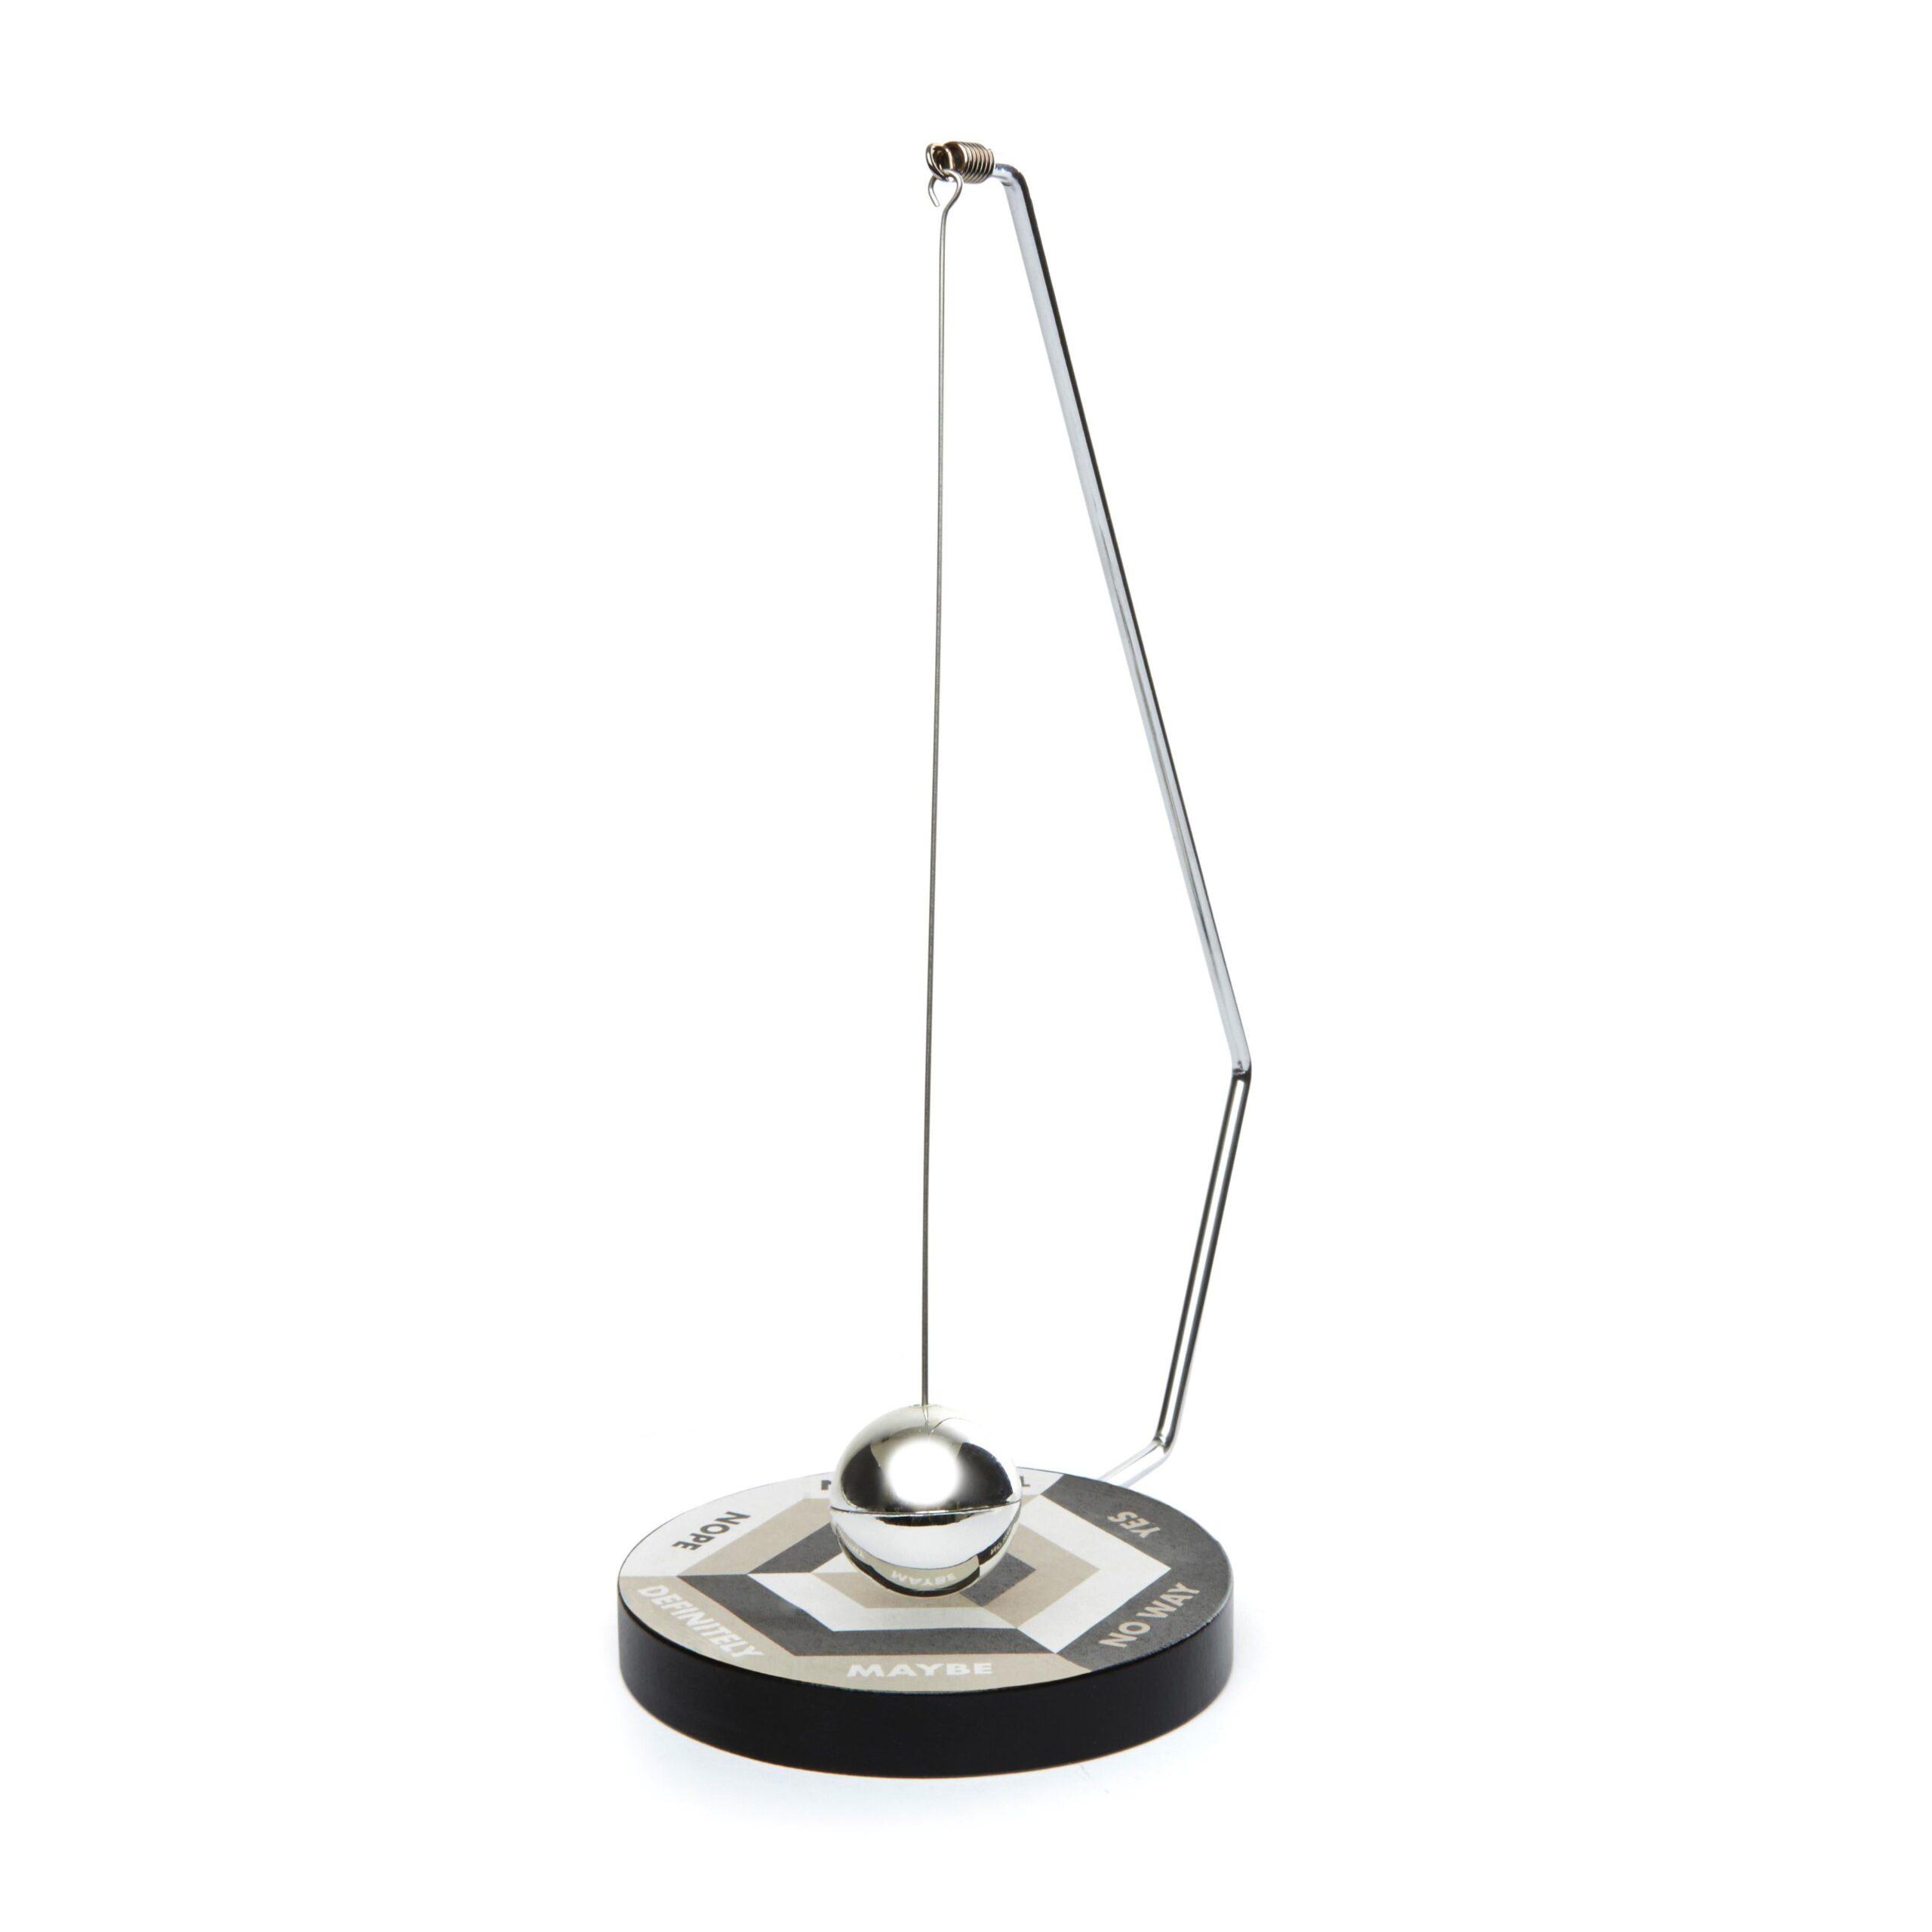 Kikkerland Decision Maker - Hanging Ball and Base Provides Quick Answer, For Undecisive and Trivial Decision Making, Table Top Display